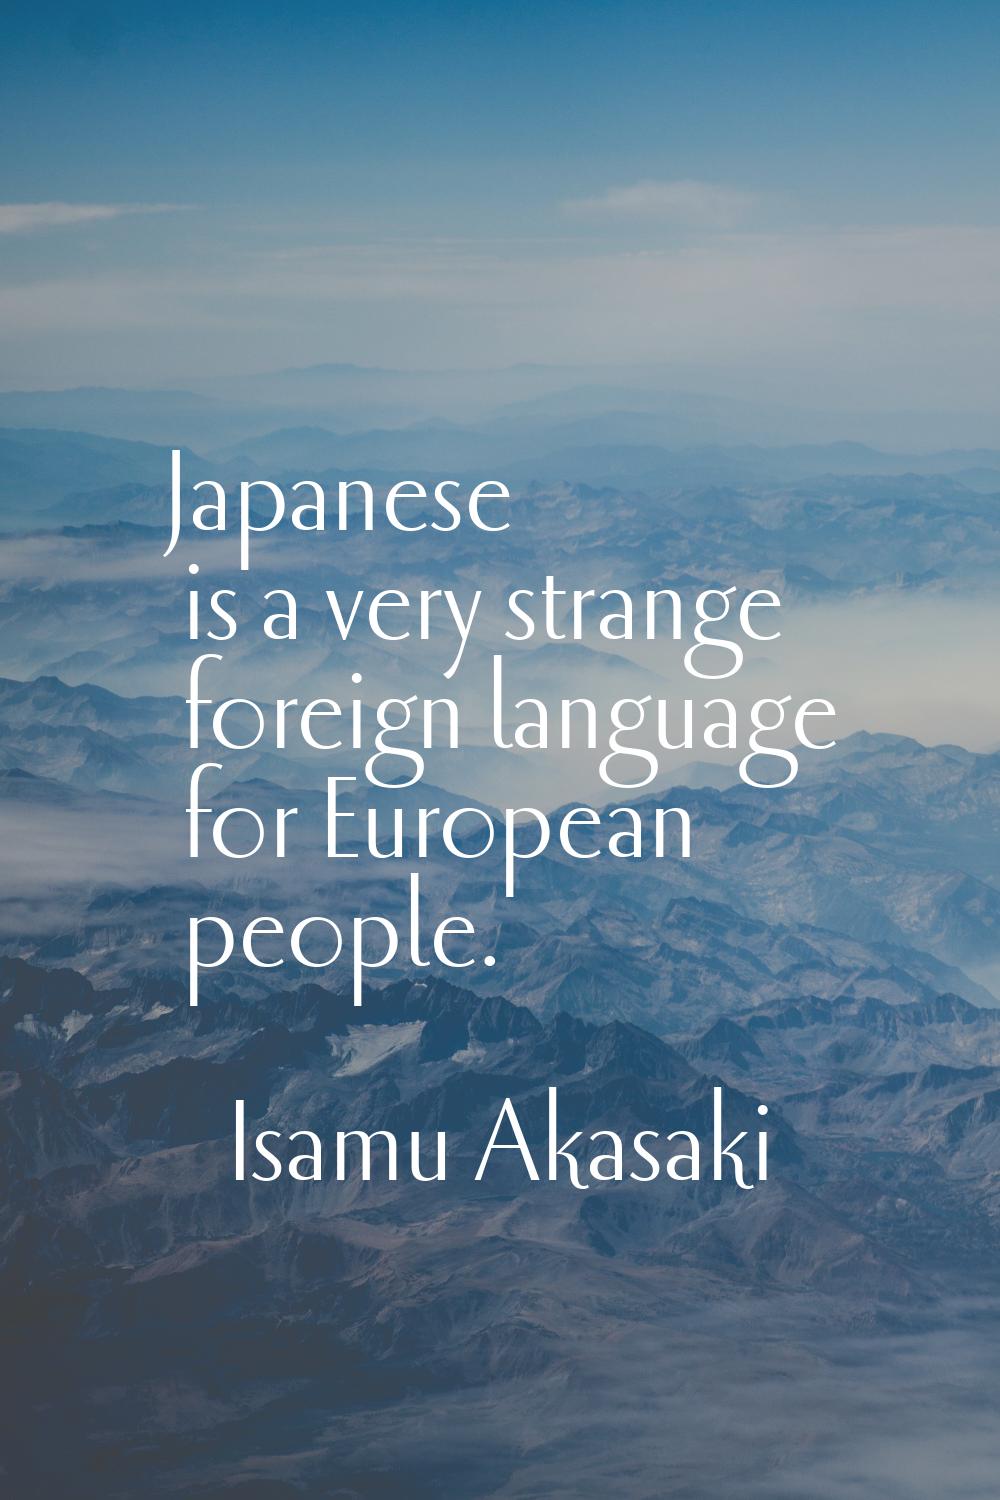 Japanese is a very strange foreign language for European people.